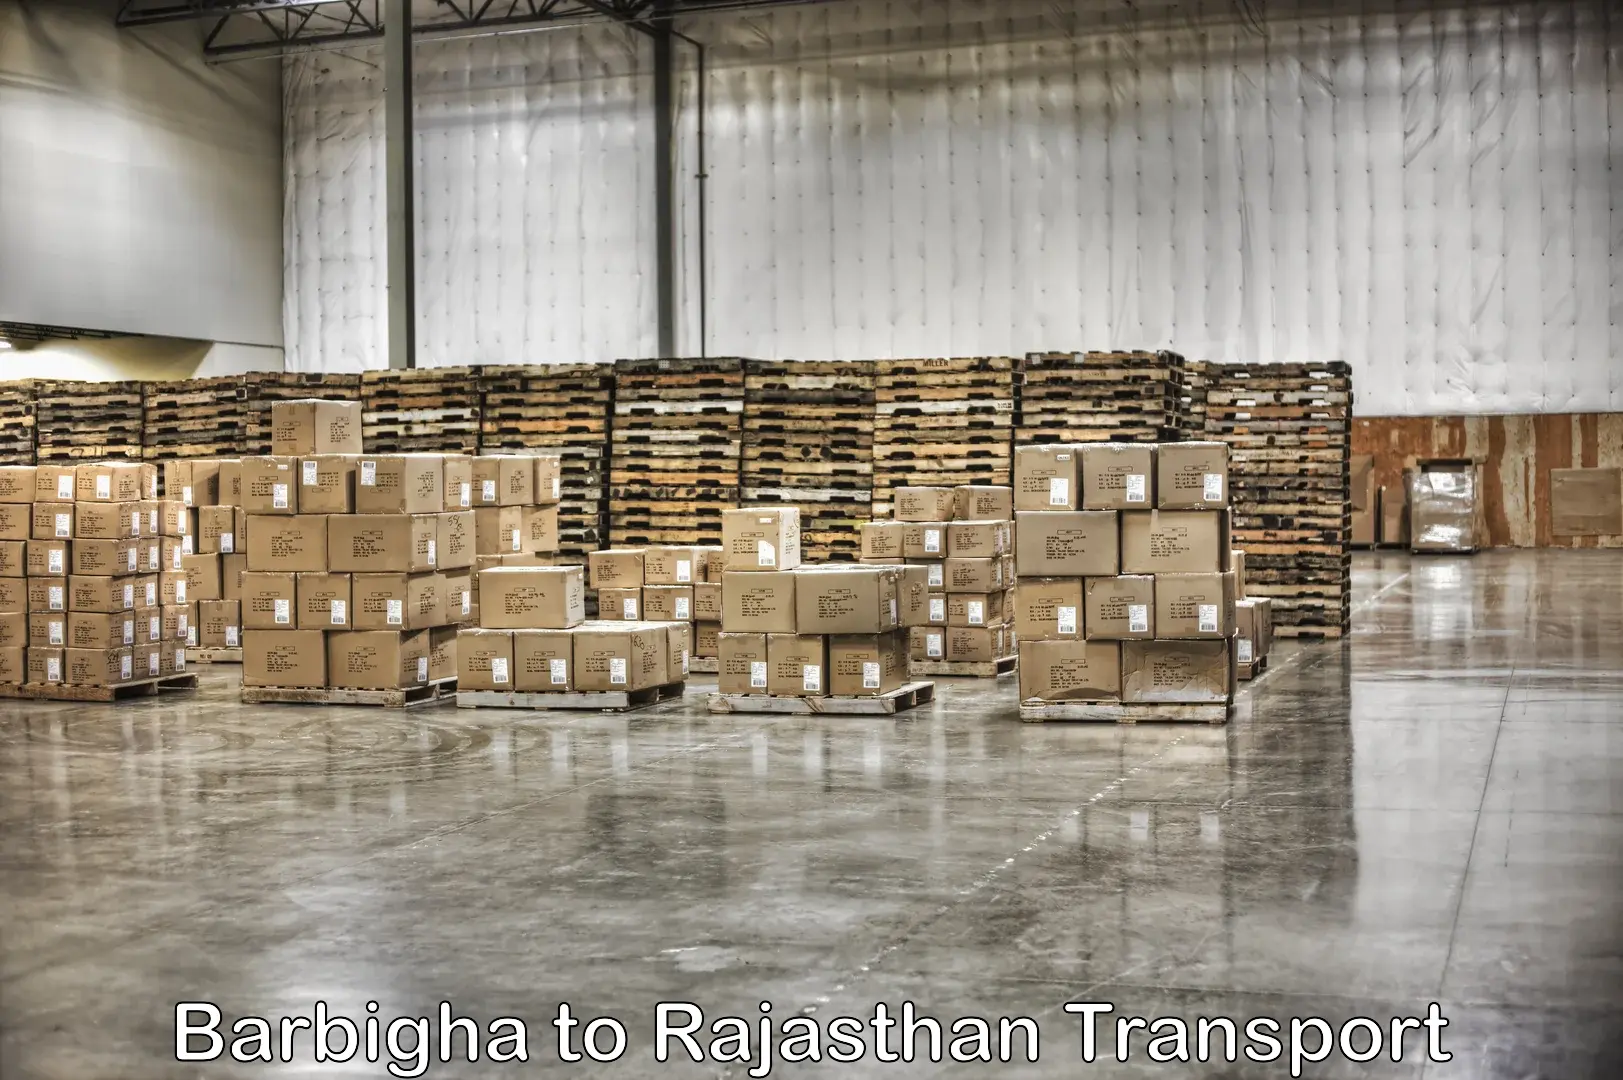 Daily parcel service transport in Barbigha to IIT Jodhpur